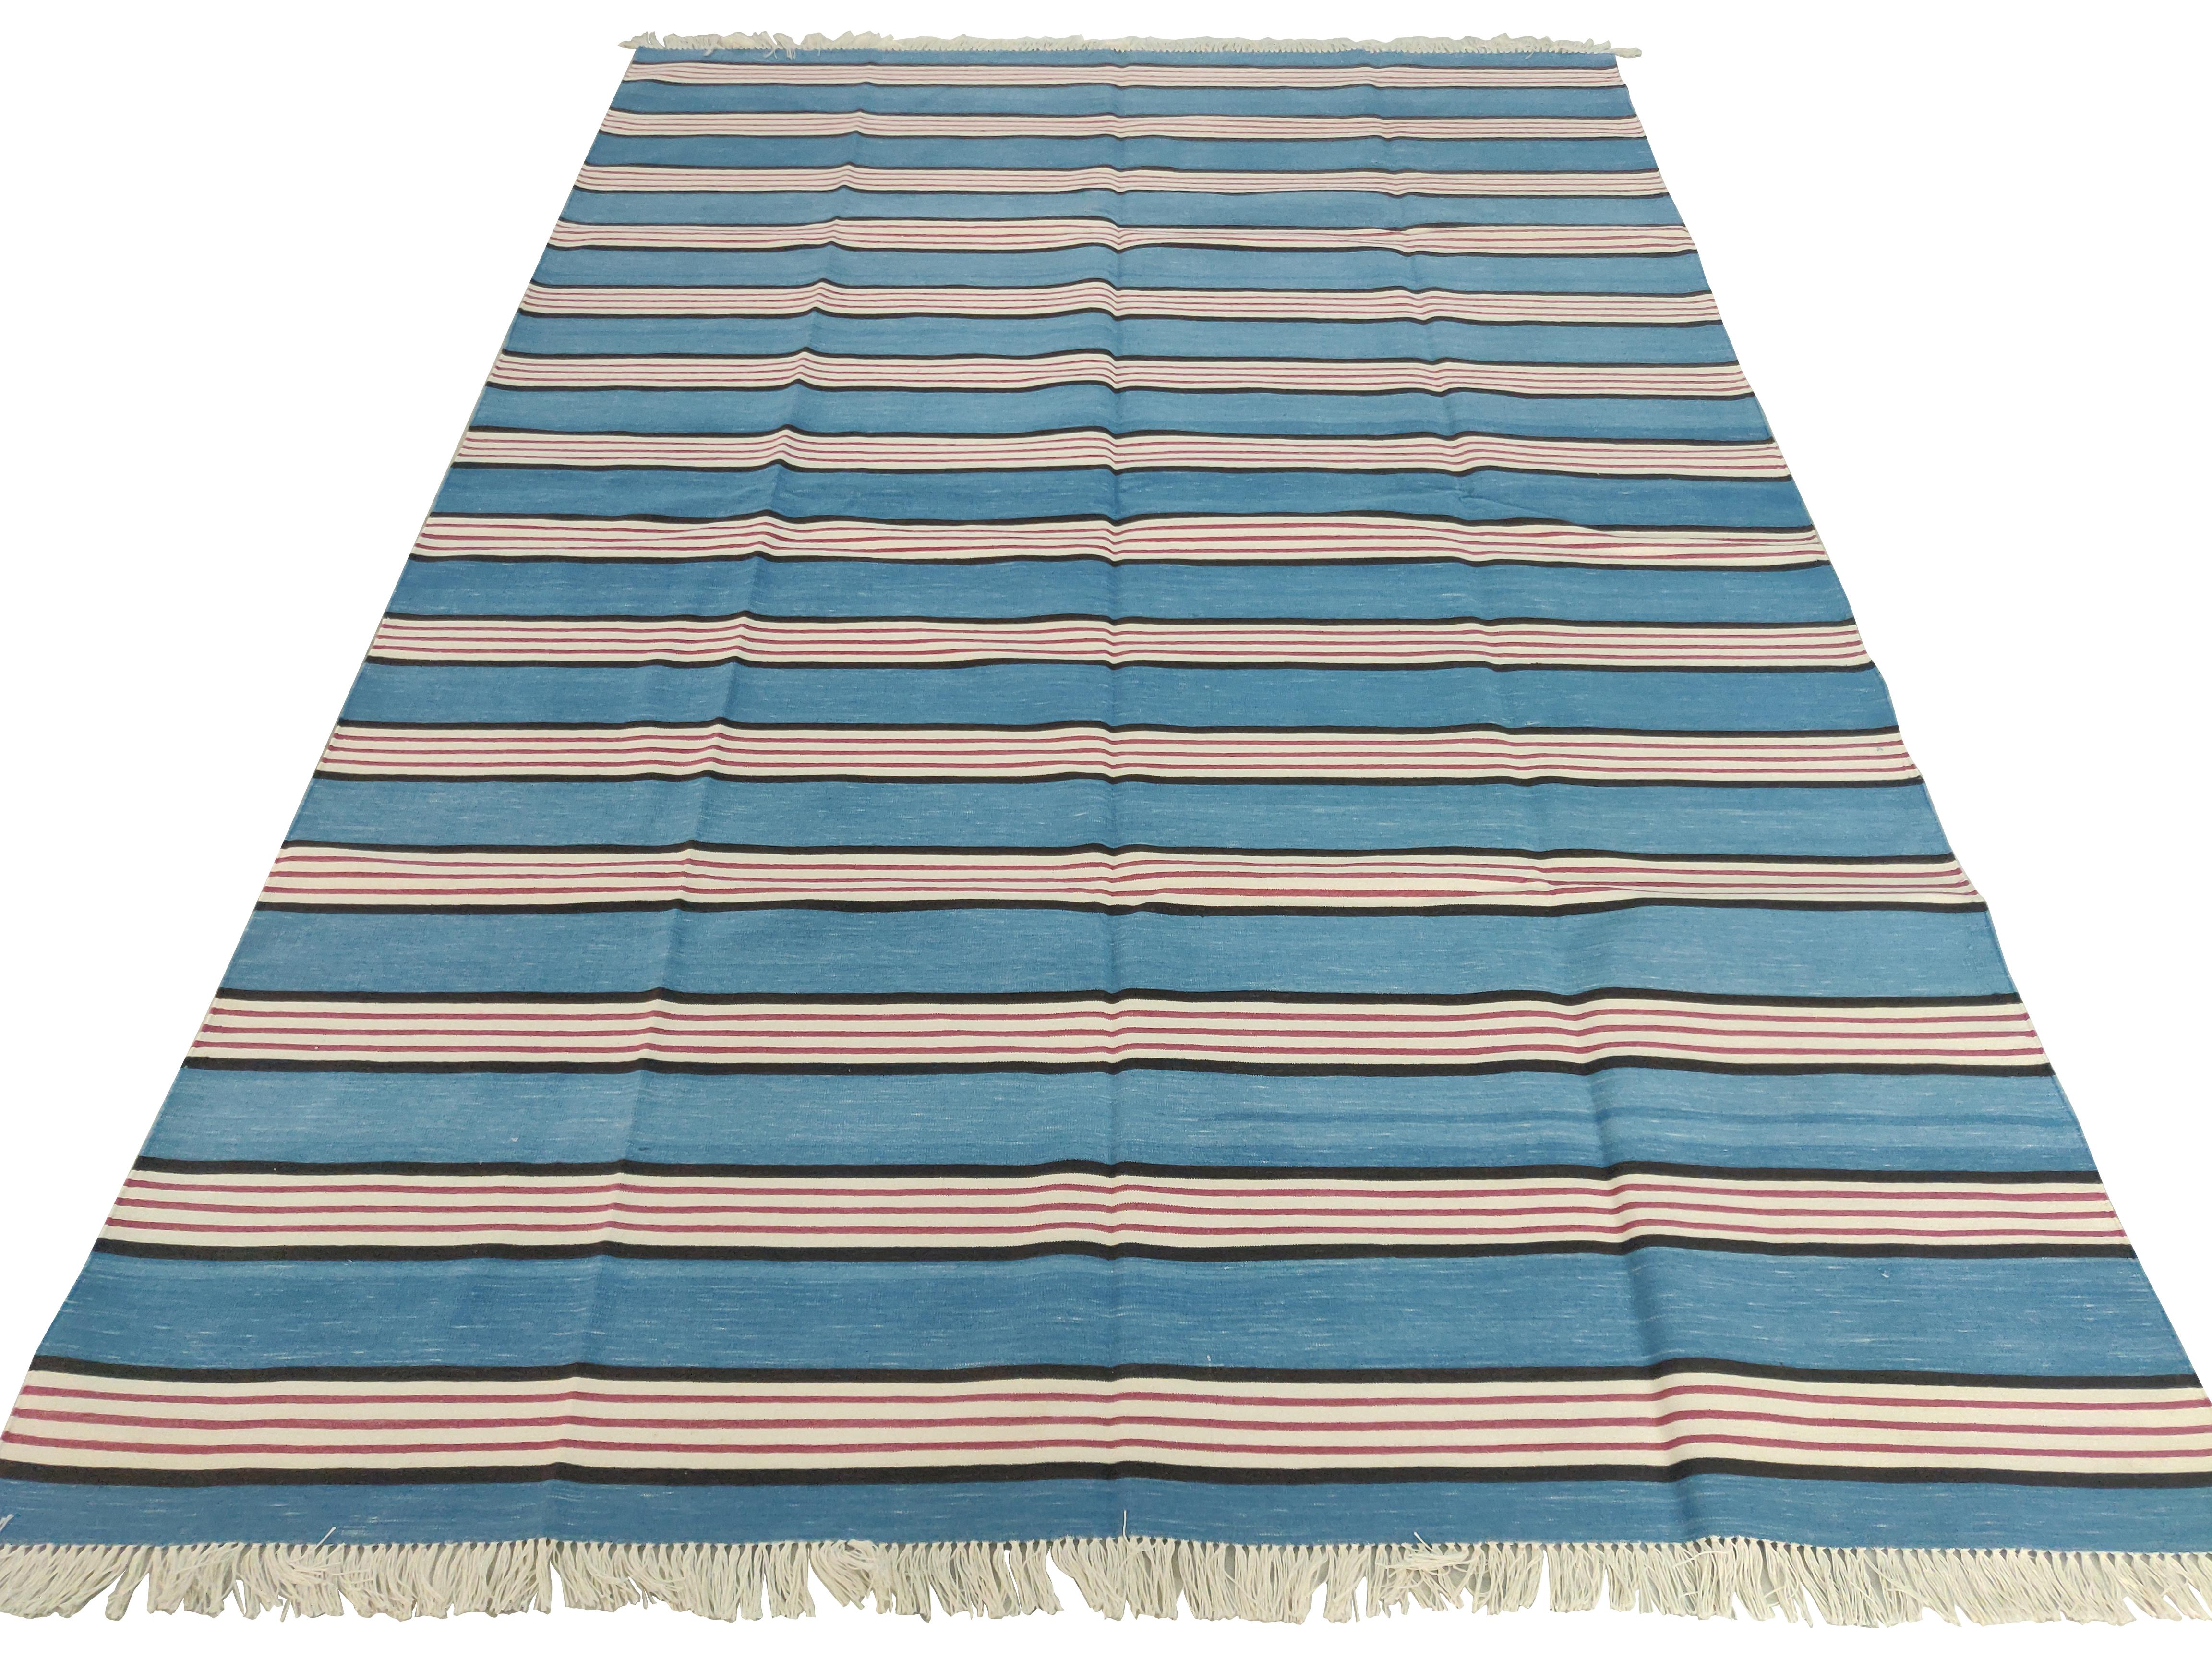 Mid-Century Modern Handmade Cotton Area Flat Weave Rug, 6x9 Blue And Pink Striped Indian Dhurrie For Sale